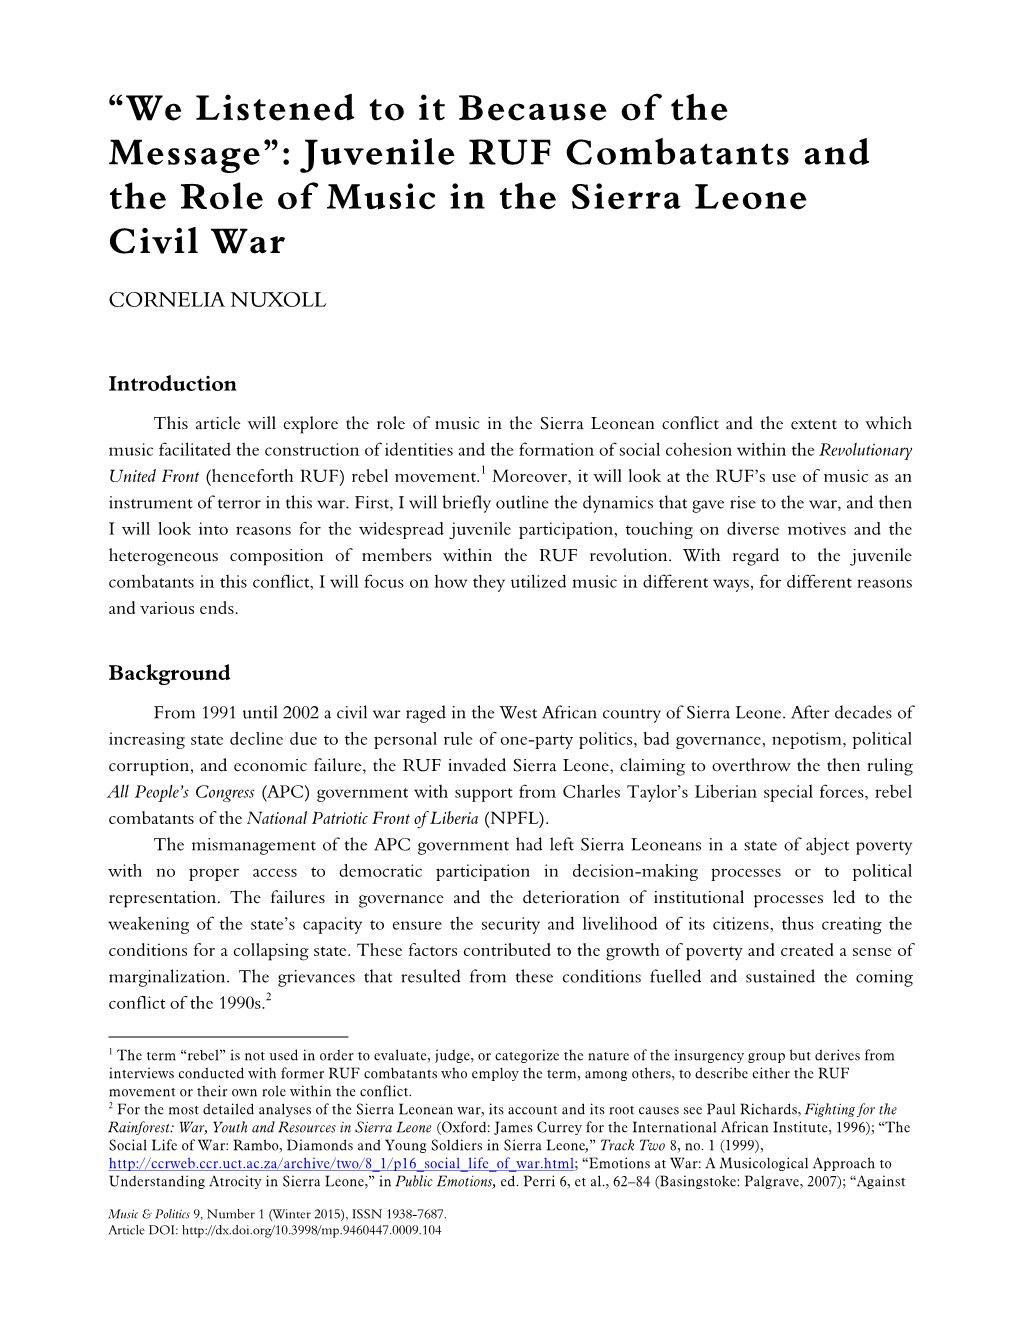 Juvenile RUF Combatants and the Role of Music in the Sierra Leone Civil War